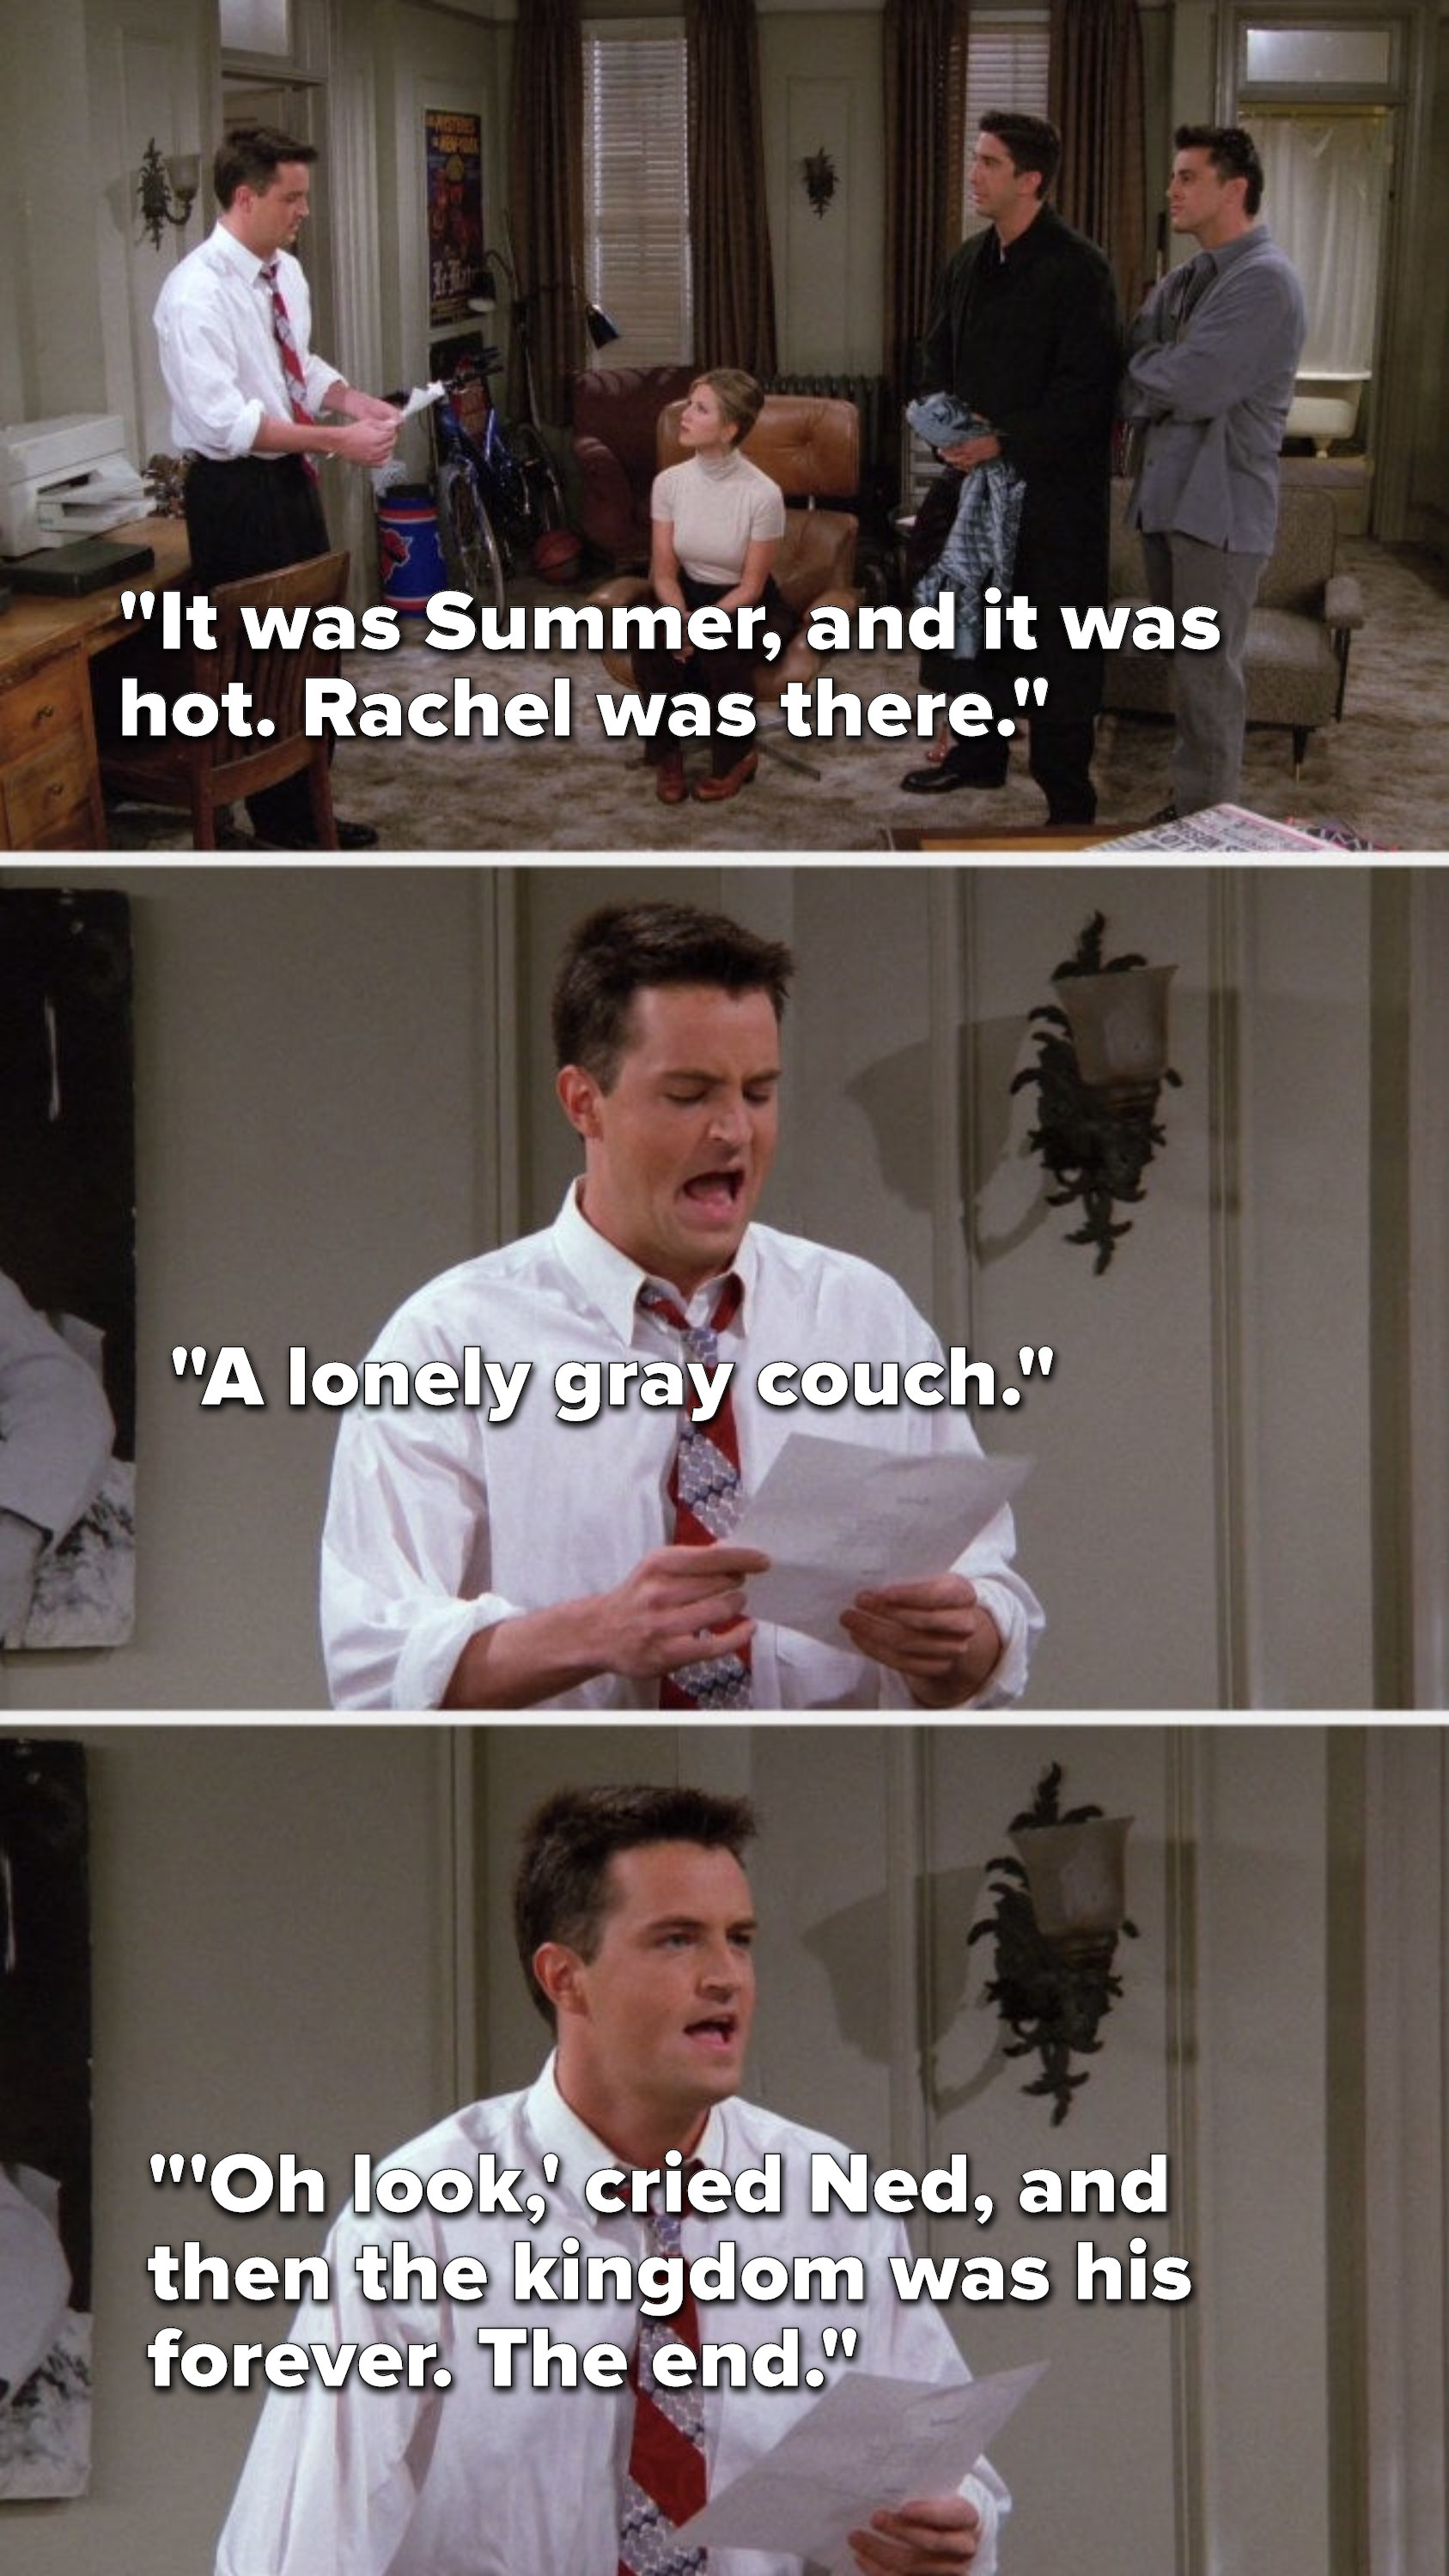 Chandler pretends to read, &quot;It was Summer, and it was hot, Rachel was there, a lonely gray couch, &#x27;Oh look,&#x27; cried Ned, and then the kingdom was his forever, the end&quot;